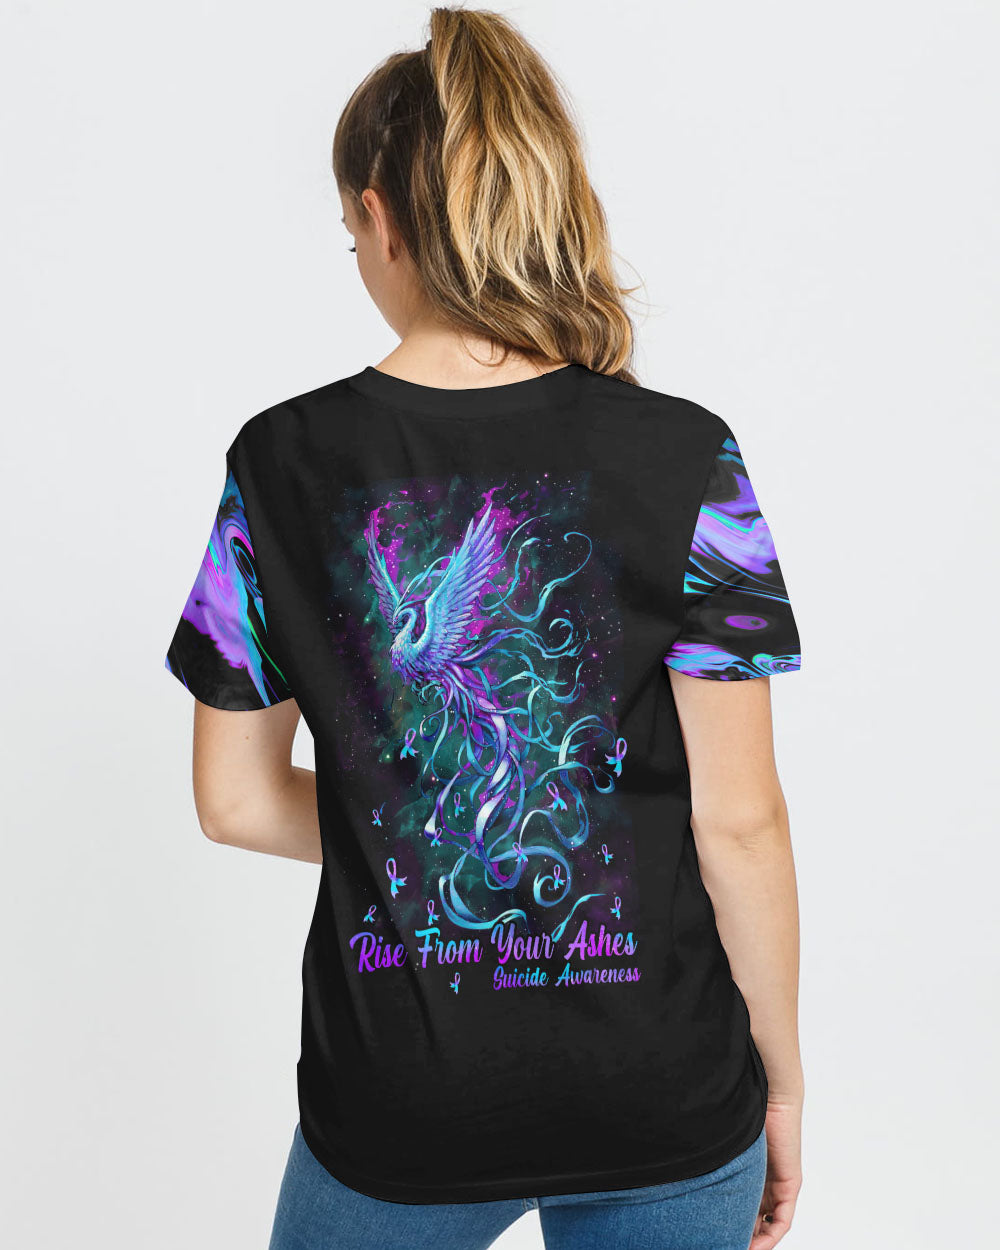 Rise From The Ashes Phoenix Women's Suicide Prevention Awareness Tshirt